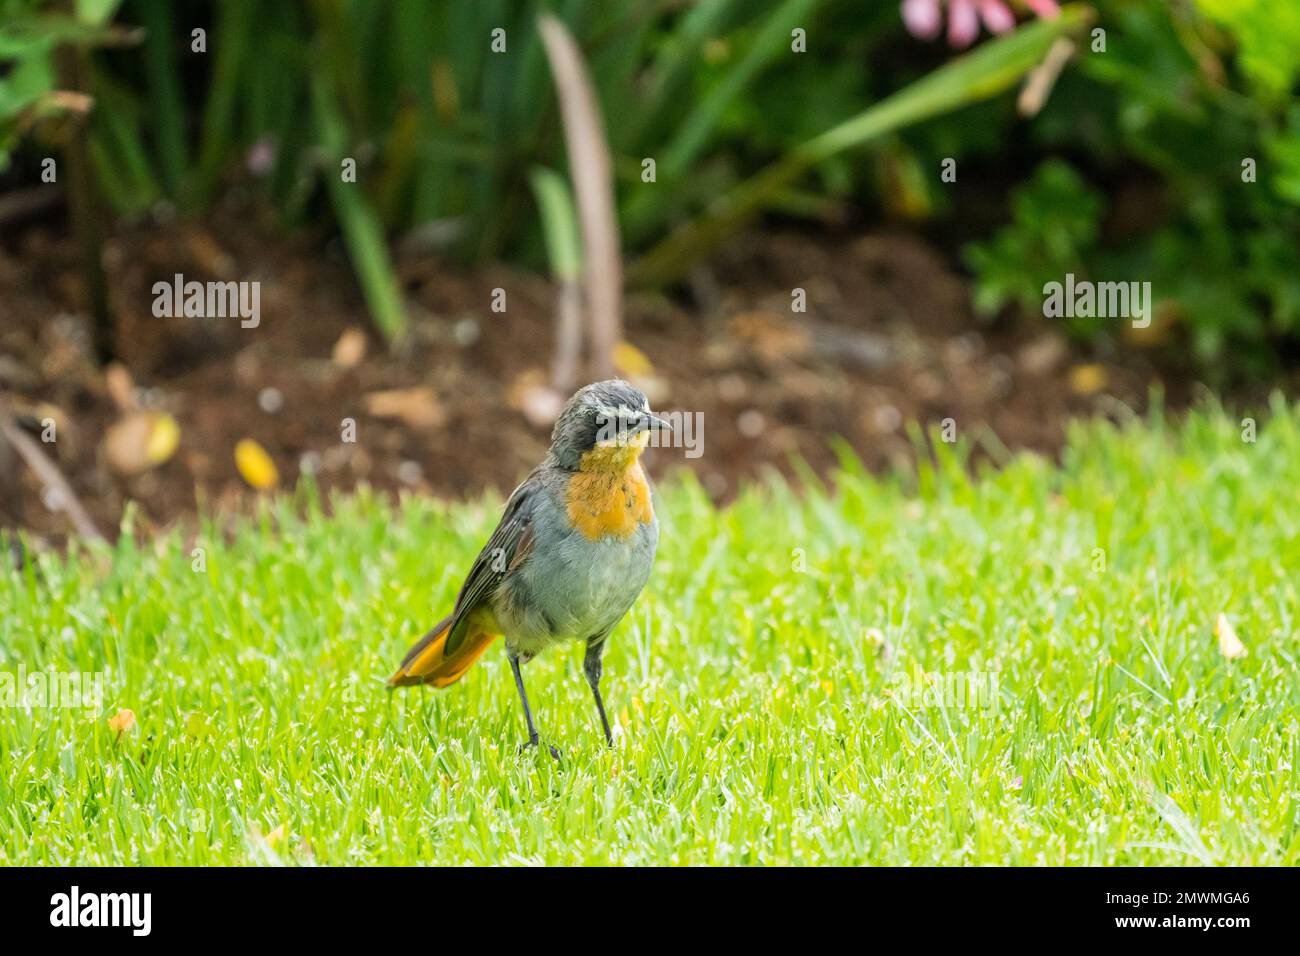 Cape Robin chat (Cossypha caffra) small passerine bird of the Old World flycatcher family Muscicapidae on the grass closeup in South Africa Stock Photo